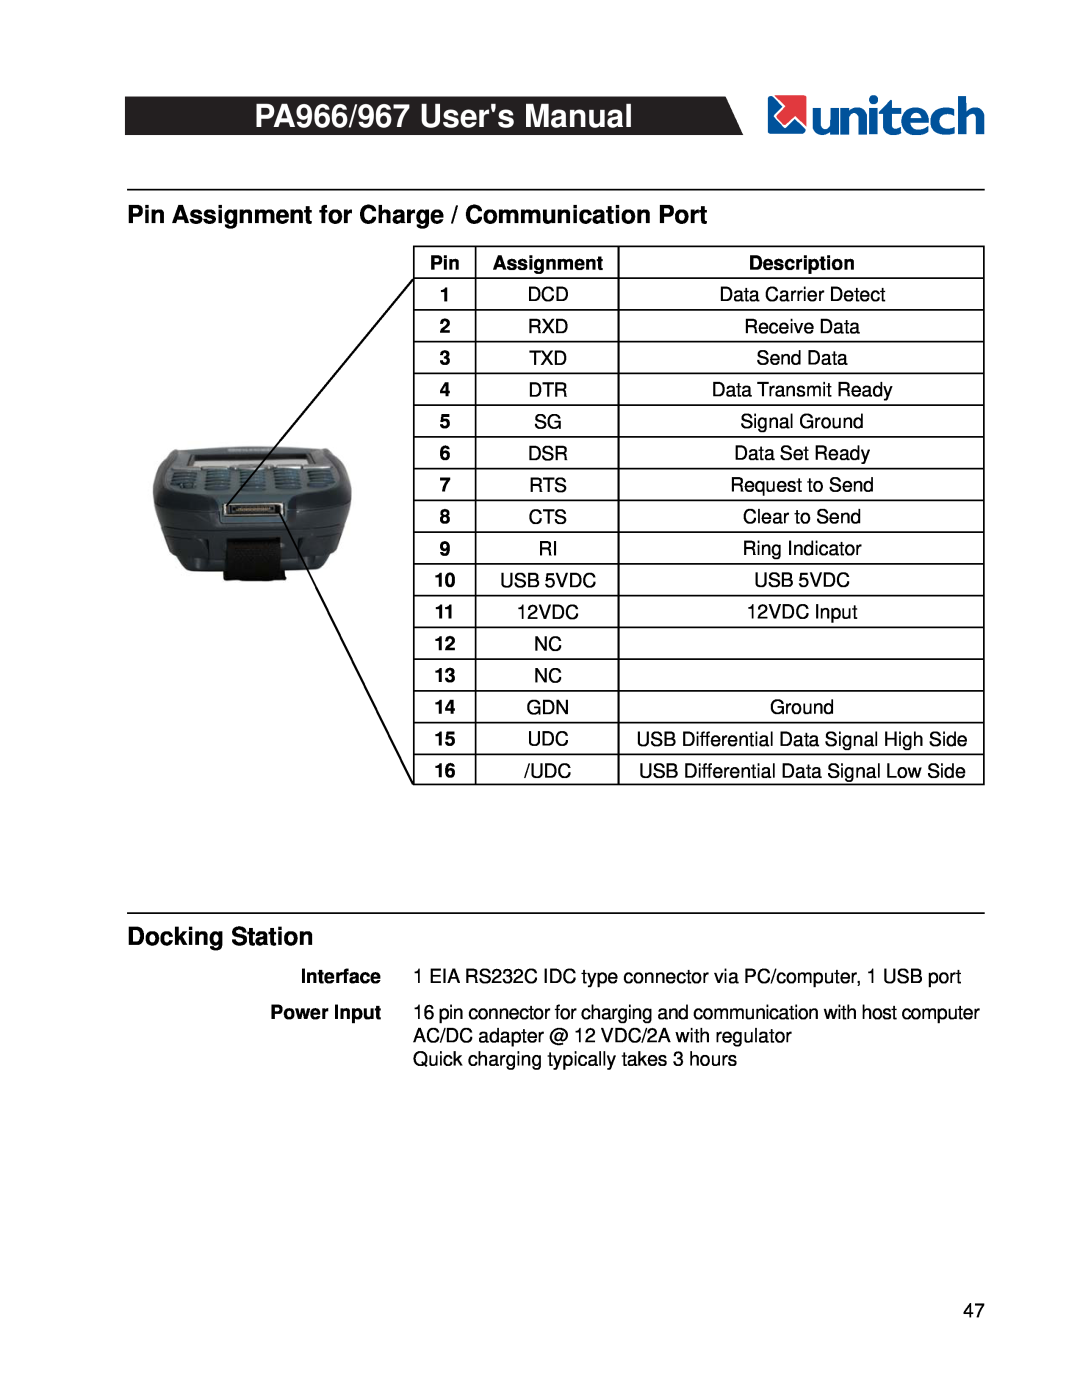 Unitech PA966 Pin Assignment for Charge / Communication Port, Docking Station, Receive Data, Signal Ground, Clear to Send 